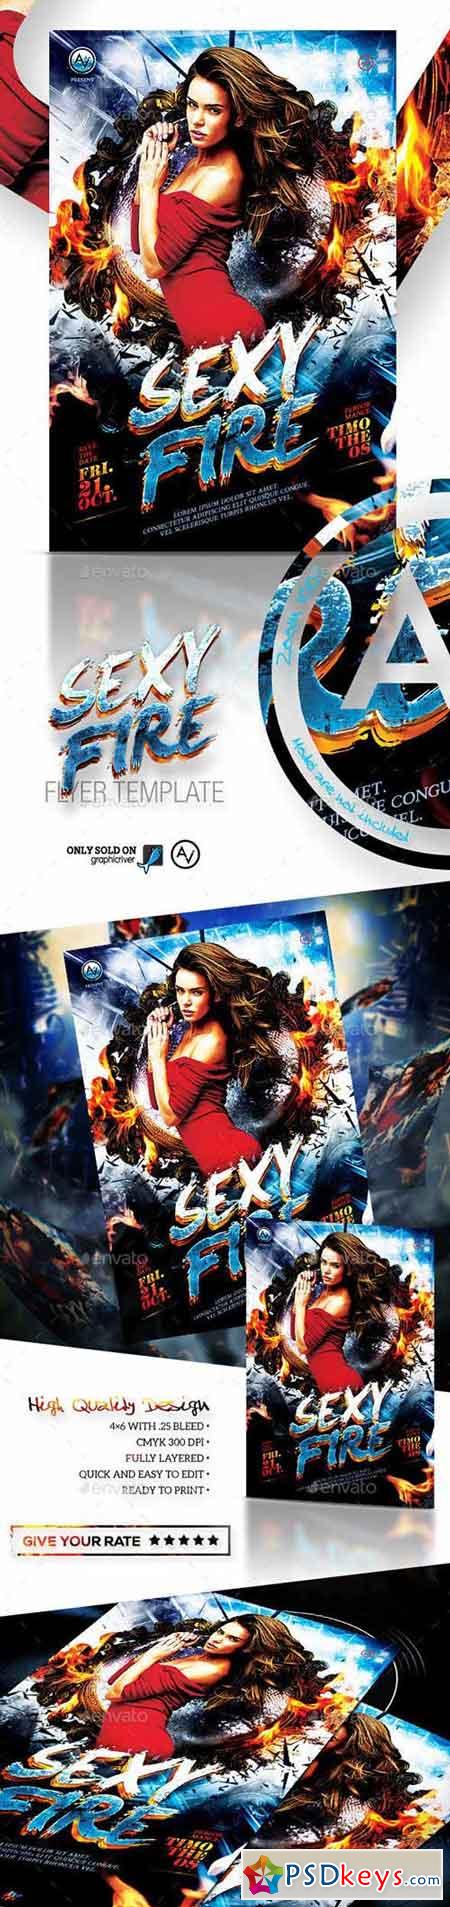 Sexy Fire Flyer Template 11172636